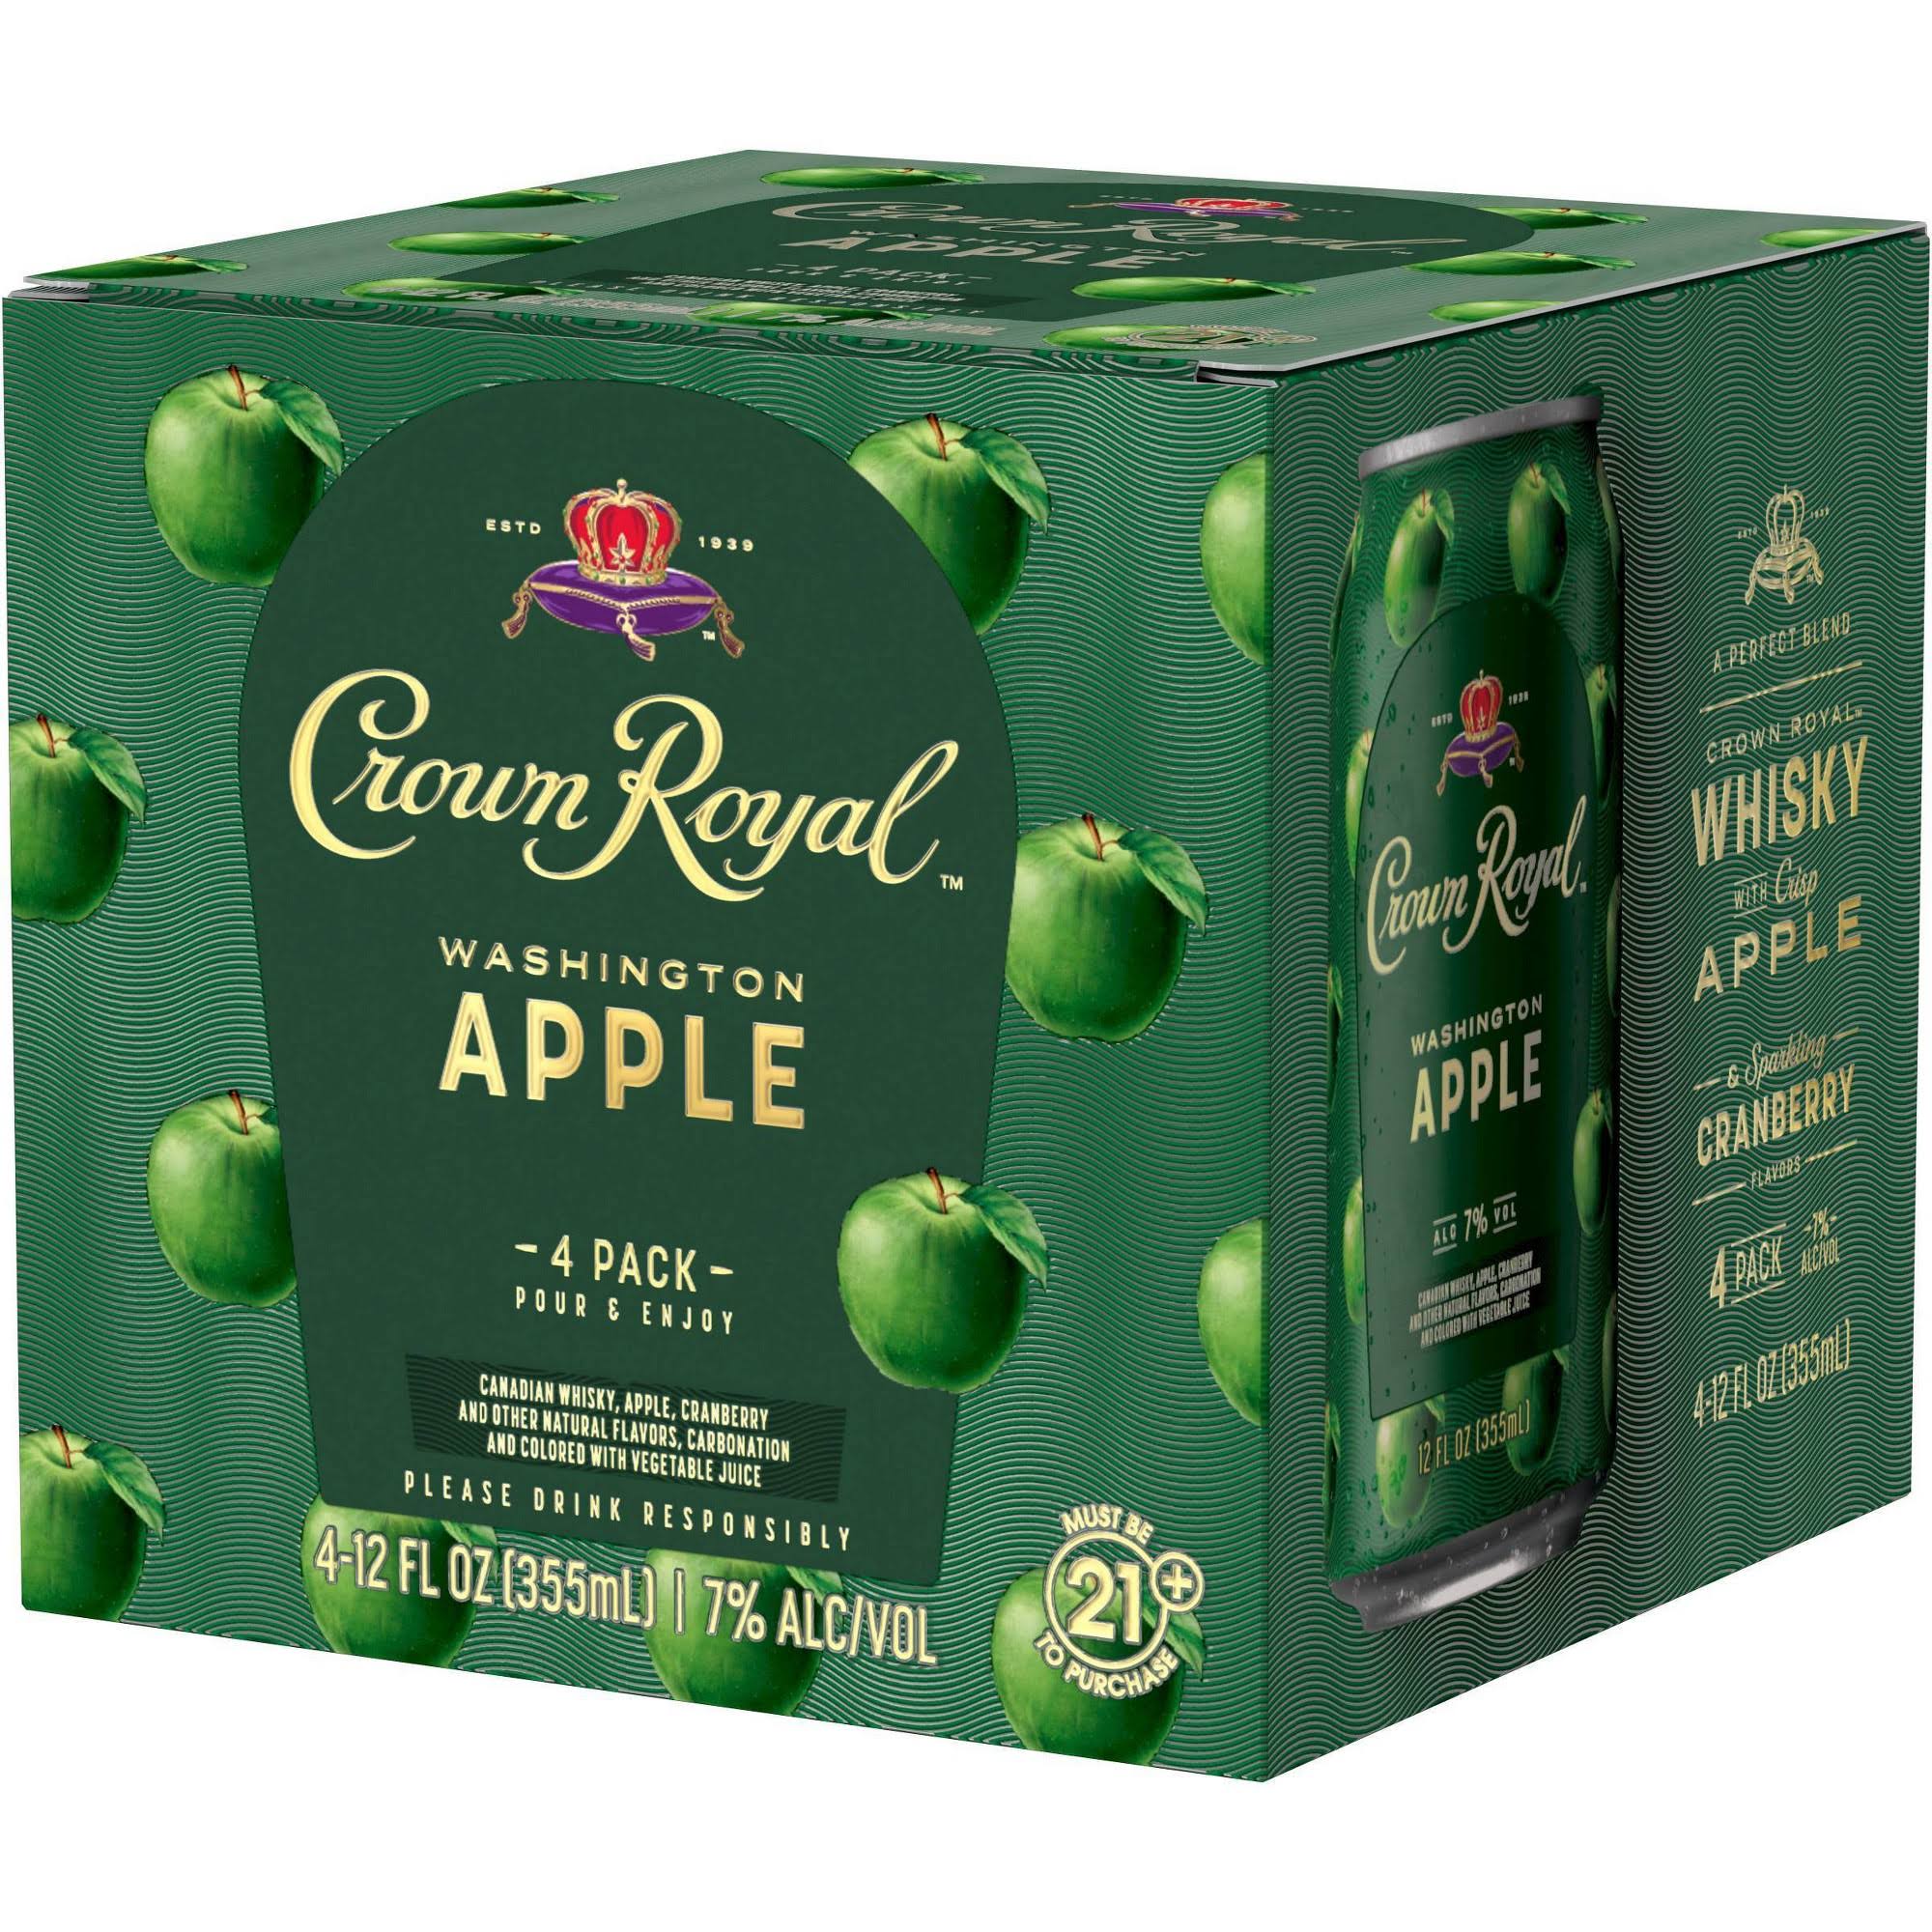 Crown Royal Whisky Cocktail, Washington Apple, 4 Pack - 4 pack, 12 fl oz cans